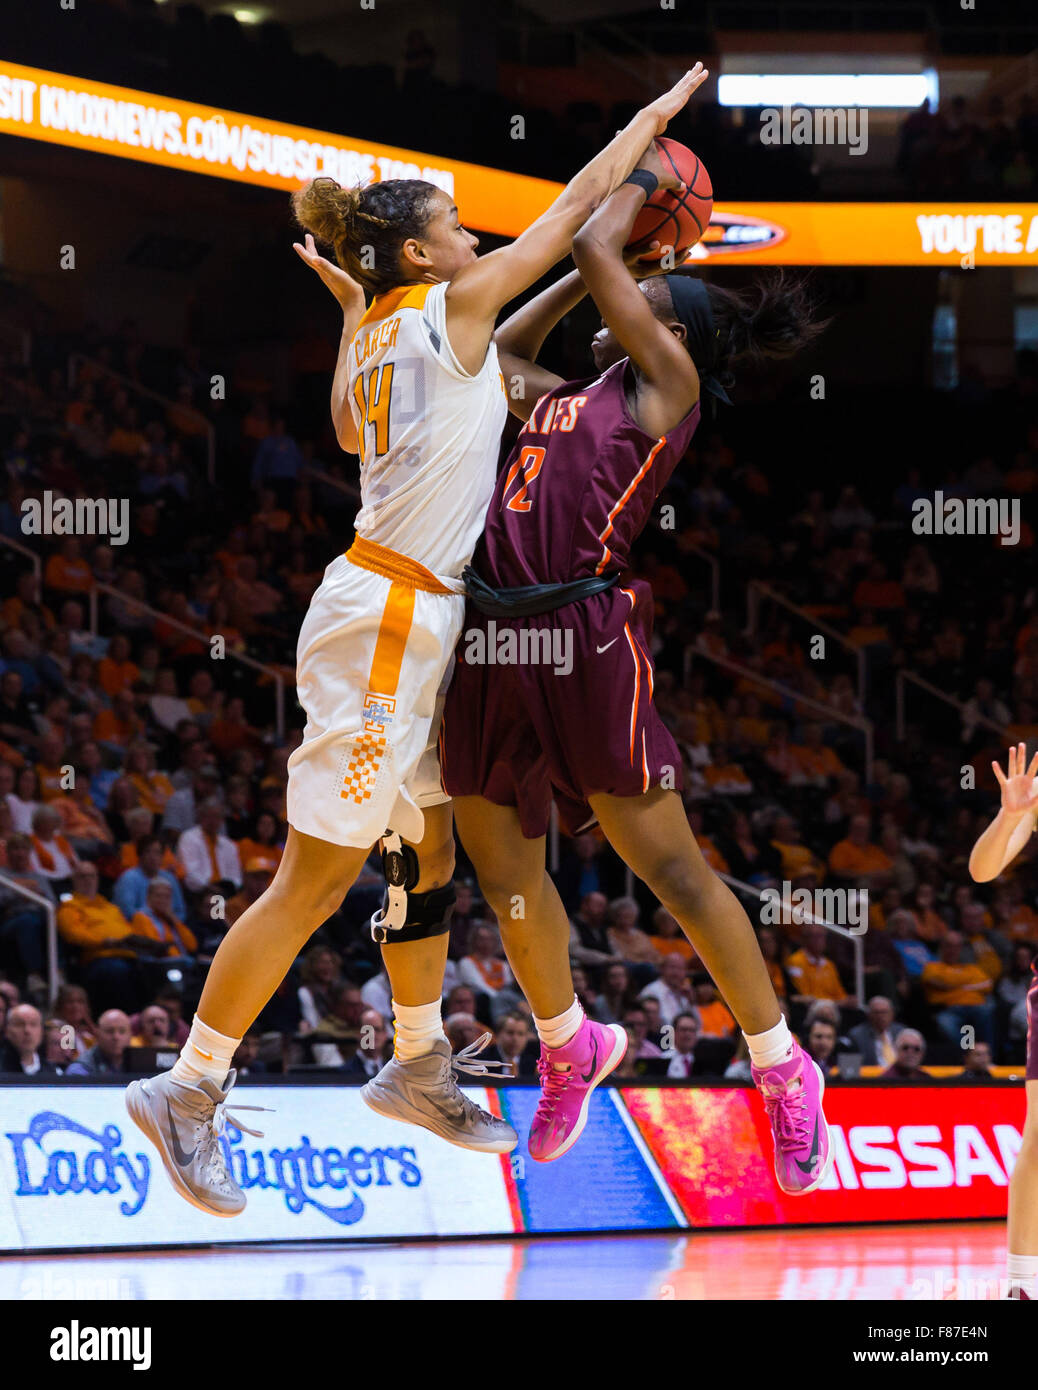 December 6, 2015: Chanette Hicks #12 of the Virginia Tech Hokies tries to shoots the ball over Andraya Carter #14 of the Tennessee Lady Volunteers during the NCAA basketball game between the University of Tennessee Lady Volunteers and the Virginia Tech Hokies at Thompson Boling Arena in Knoxville TN Tim Gangloff/CSM Stock Photo